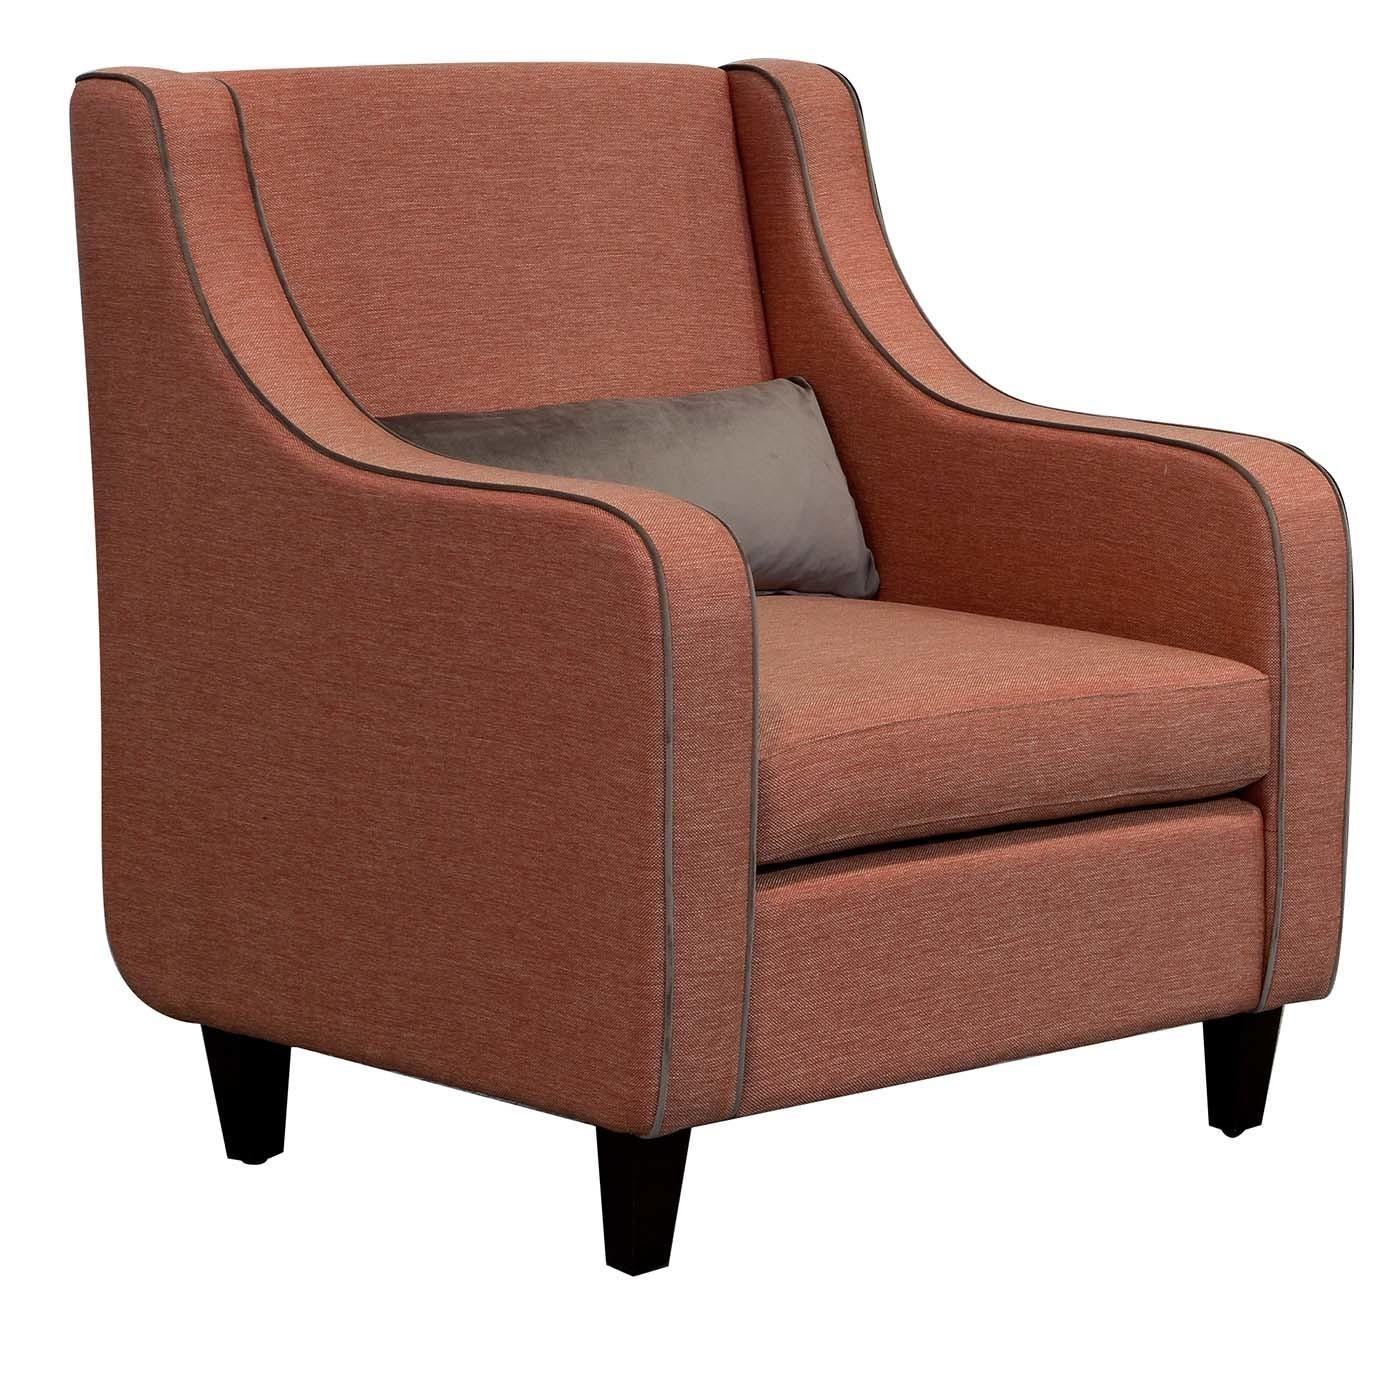 A testament to traditional craftsmanship and aesthetic balance, this elegant armchair's sweeping arms and welted seams give a polished look to the structured silhouette. Sitting on dark walnut-veneered solid wood feet, this comfortable armchair is